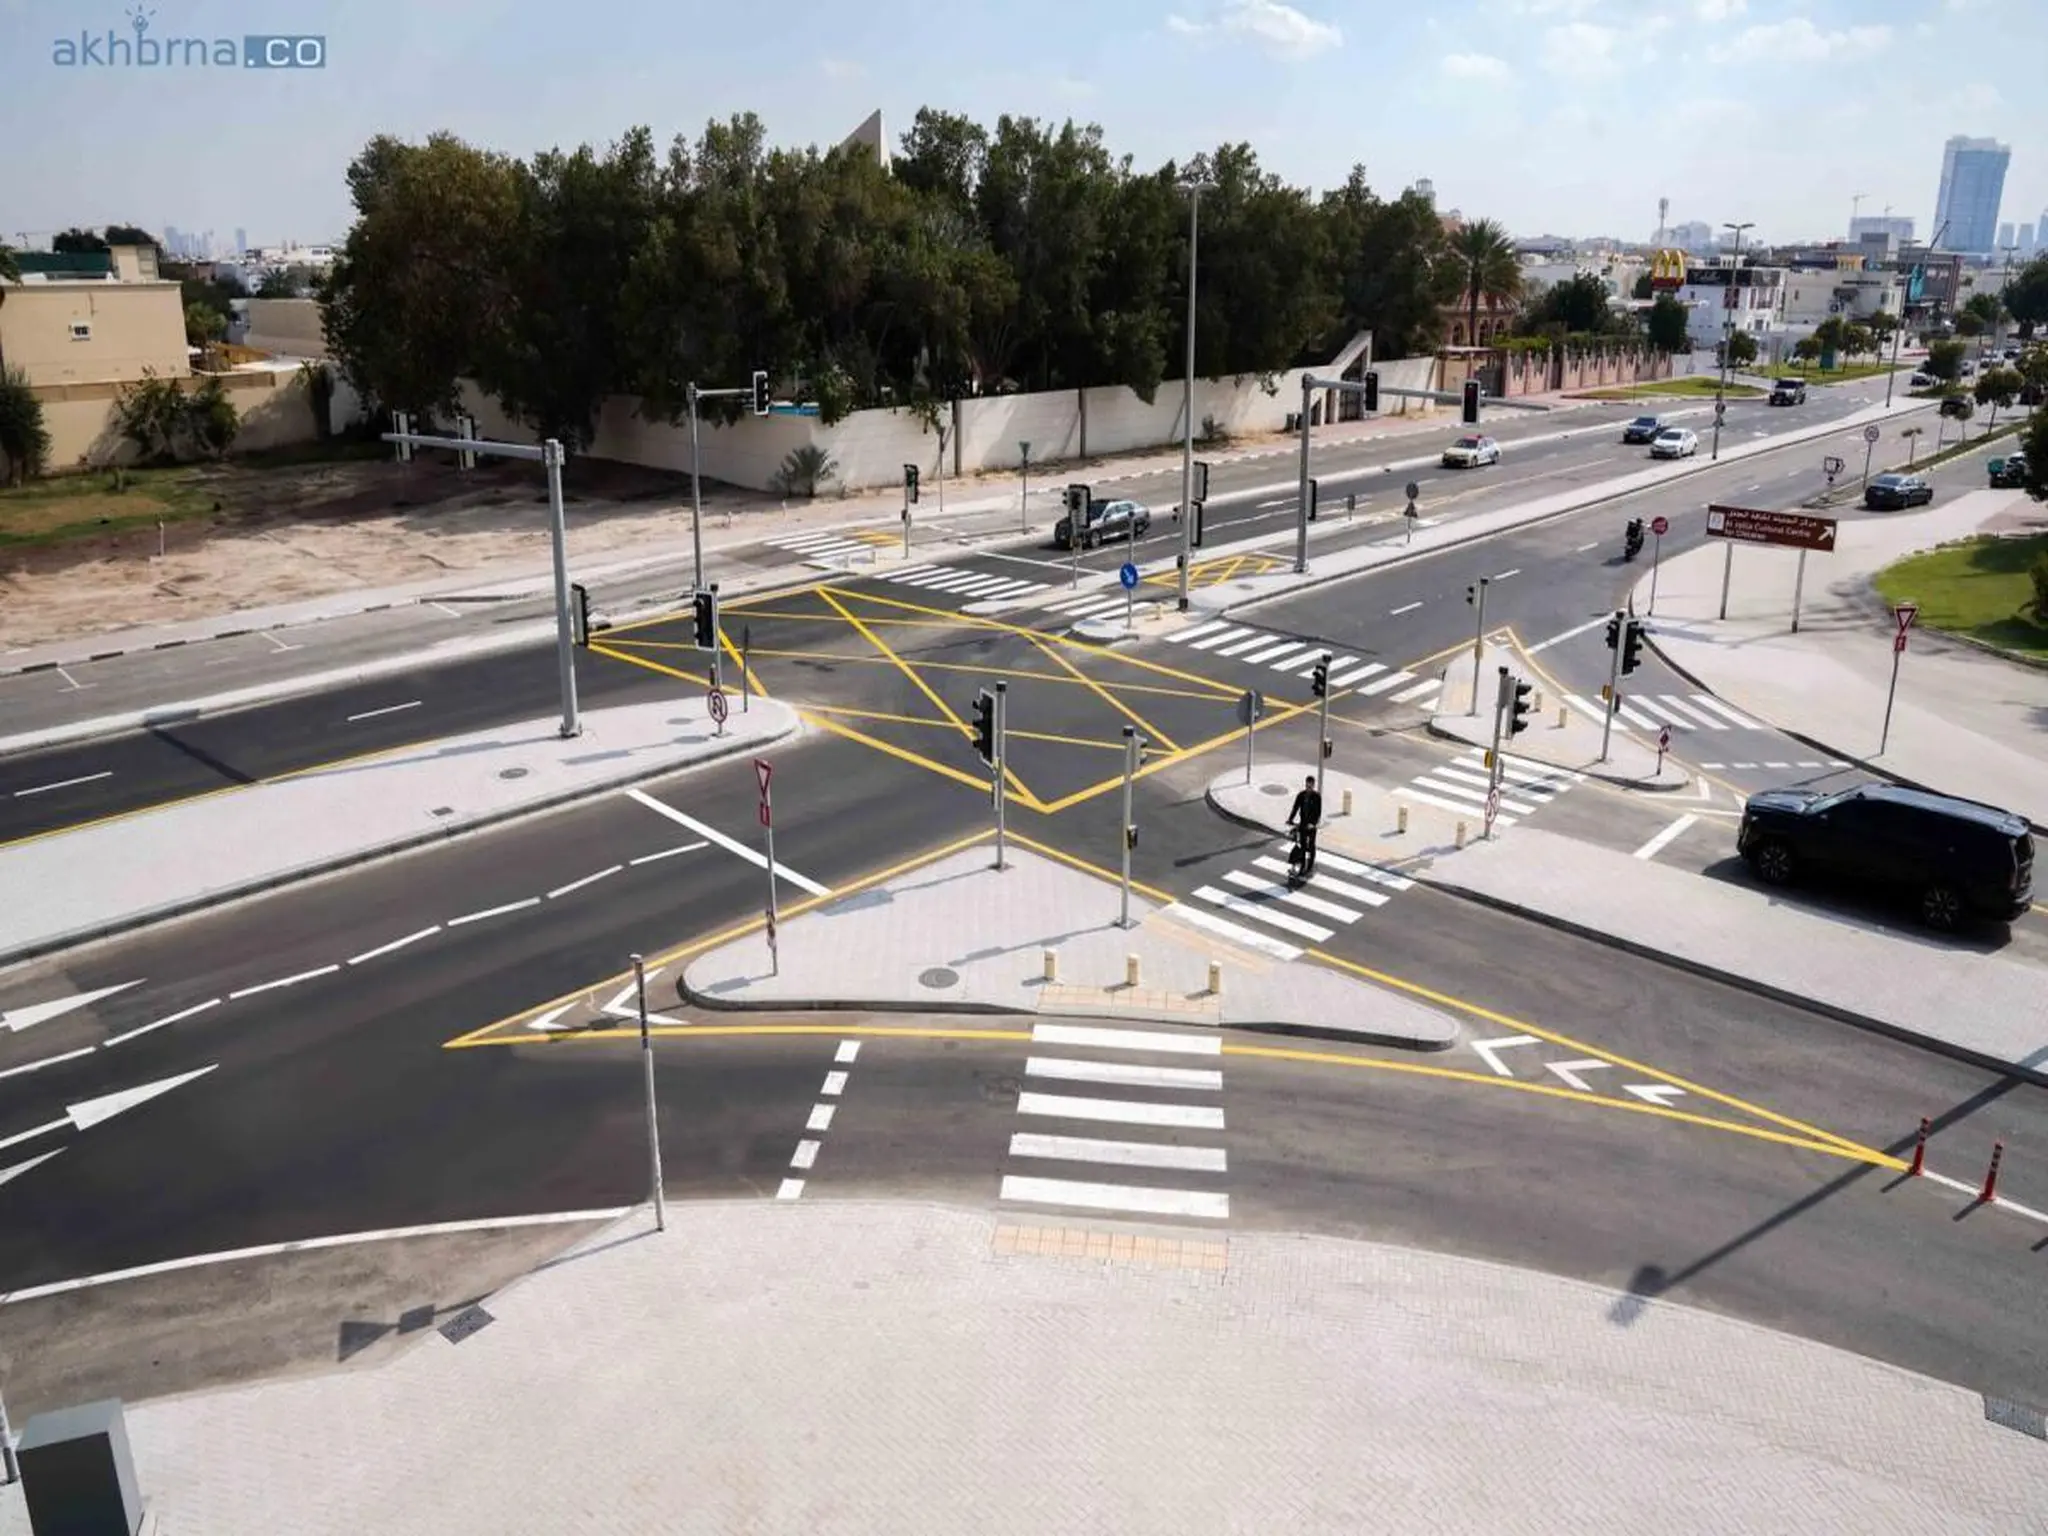 Dubai Authority announces a new junction on Al Wasl Road that eases traffic flow